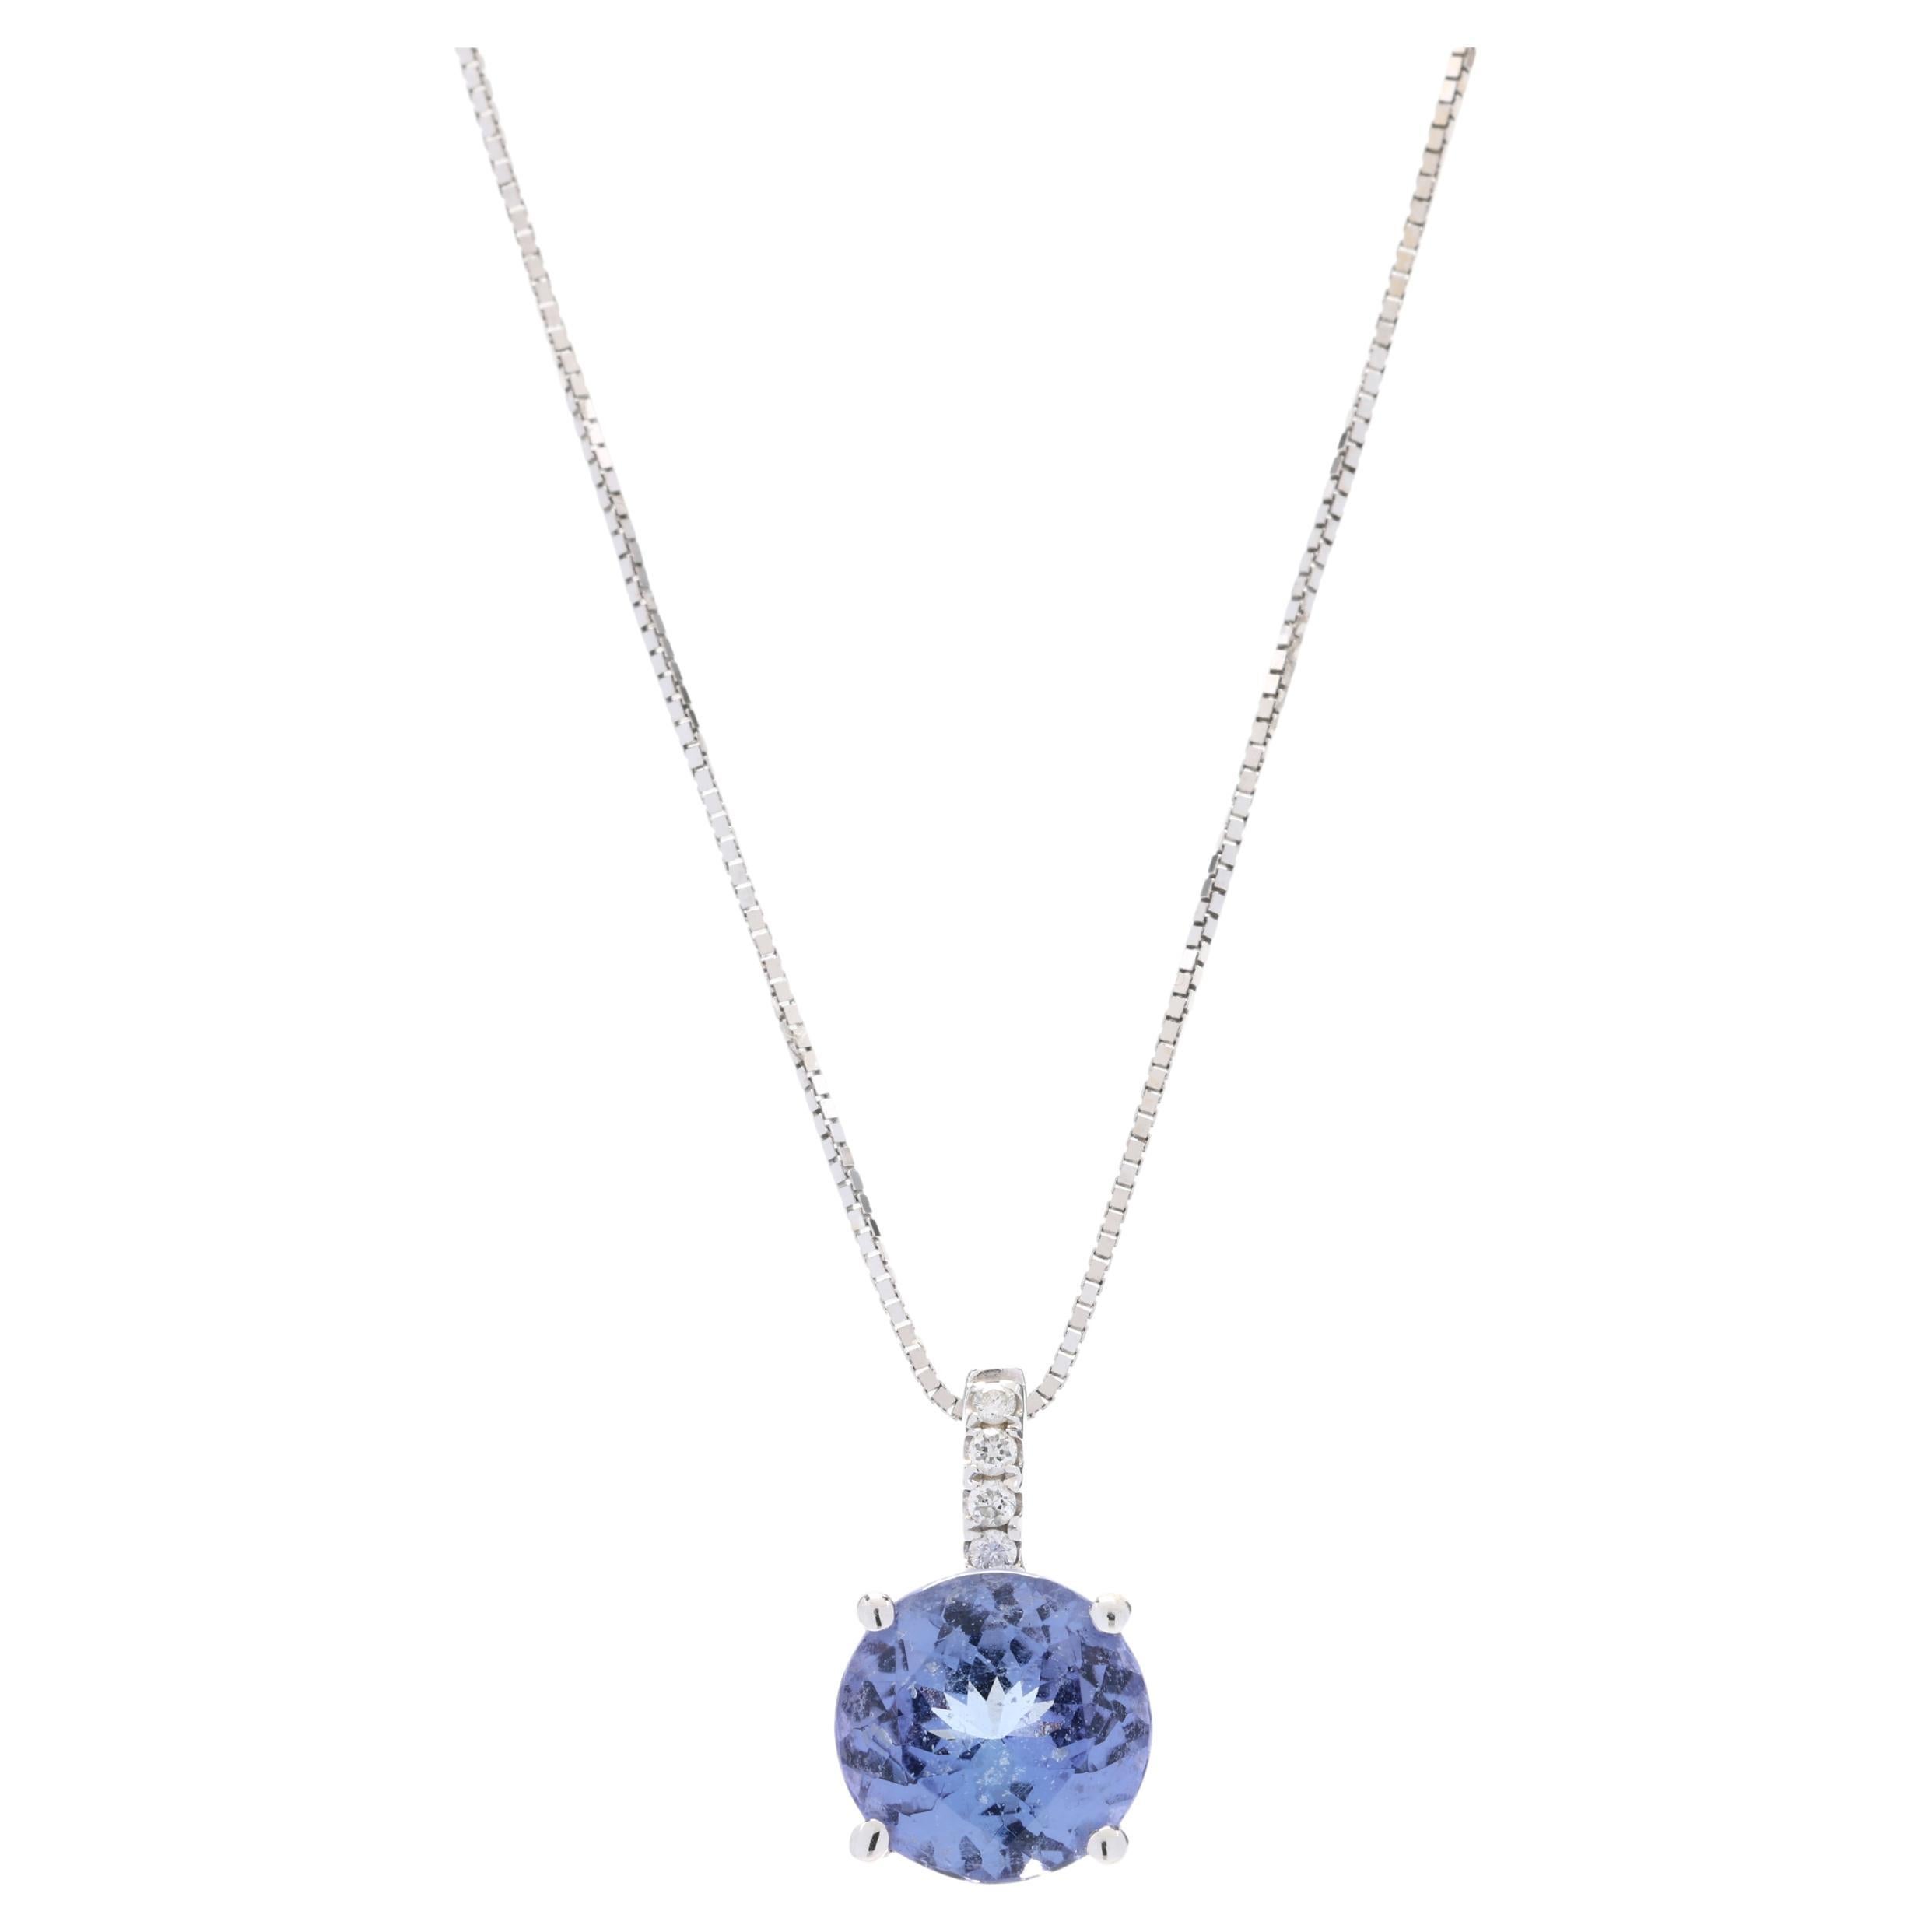 1.42ctw Diamond and Tanzanite Pendant Necklace, 14k White Gold, Length 18 Inches